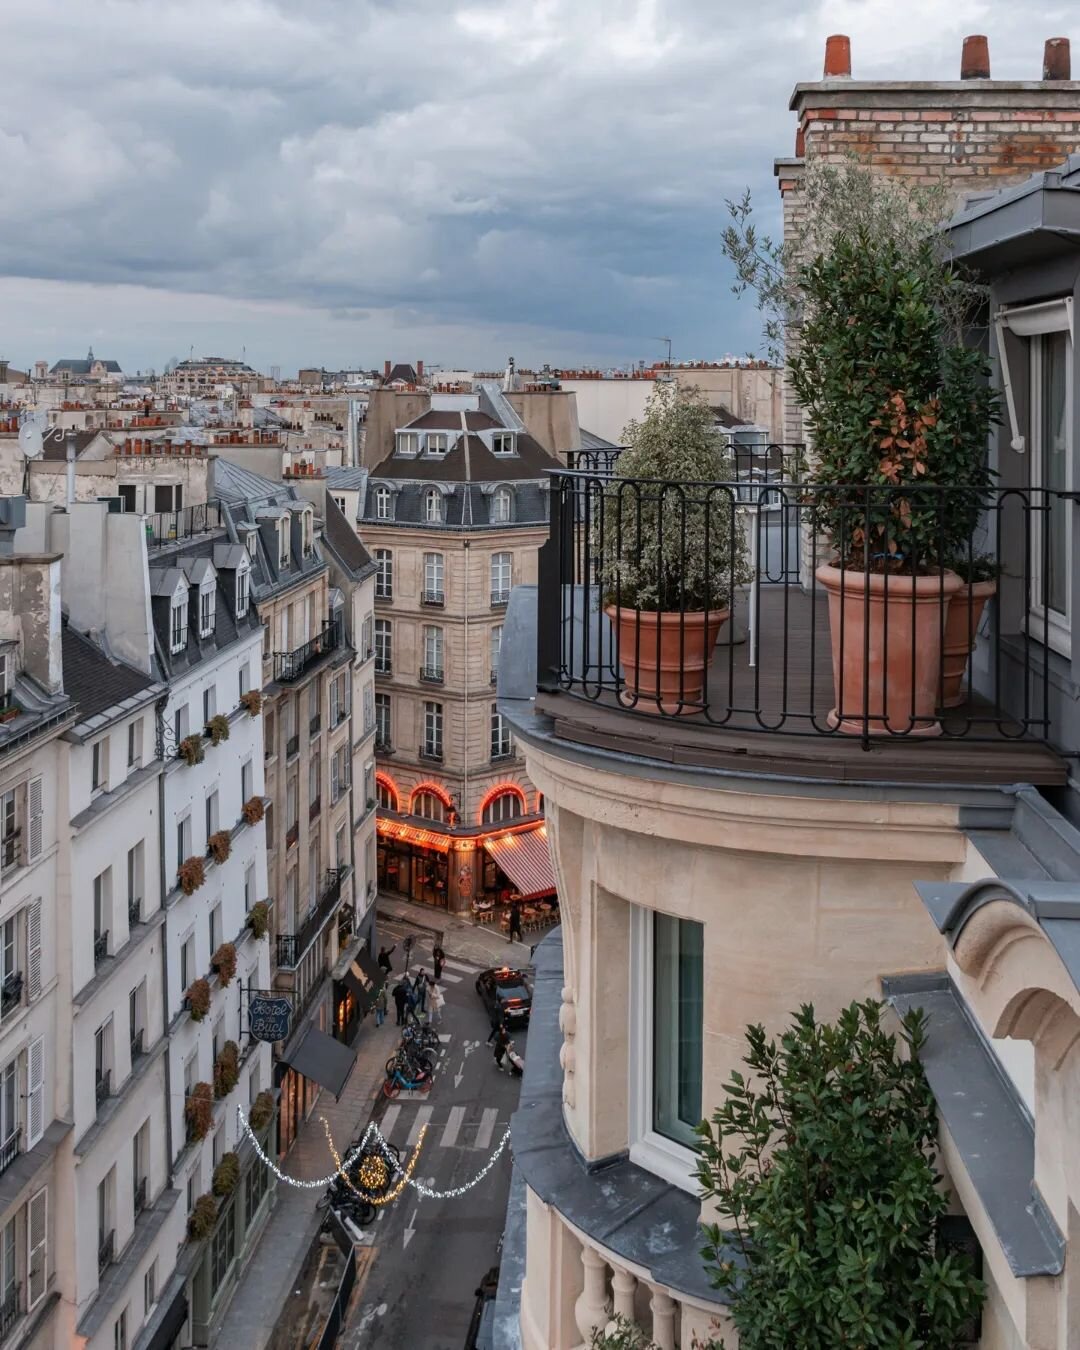 &bull; When Fred @gogojungle asked me if I wanted to discover @villadespresparis this week, it was a no-brainer for me!
&nbsp;
I've had this gorgeous 5* hotel on my list since I discovered it last summer, and I'm so happy to be able to bring it to yo